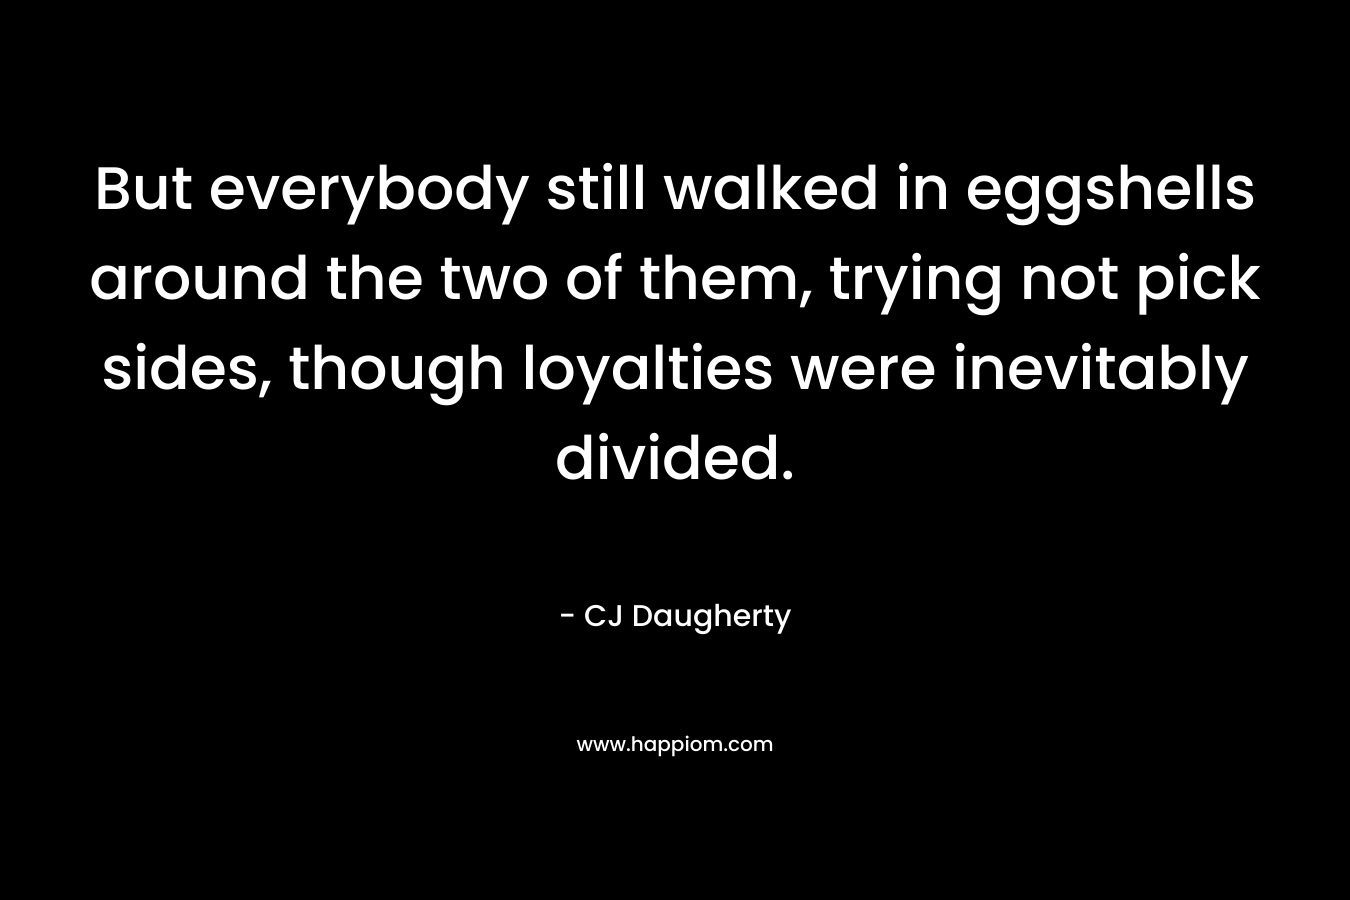 But everybody still walked in eggshells around the two of them, trying not pick sides, though loyalties were inevitably divided. – CJ Daugherty